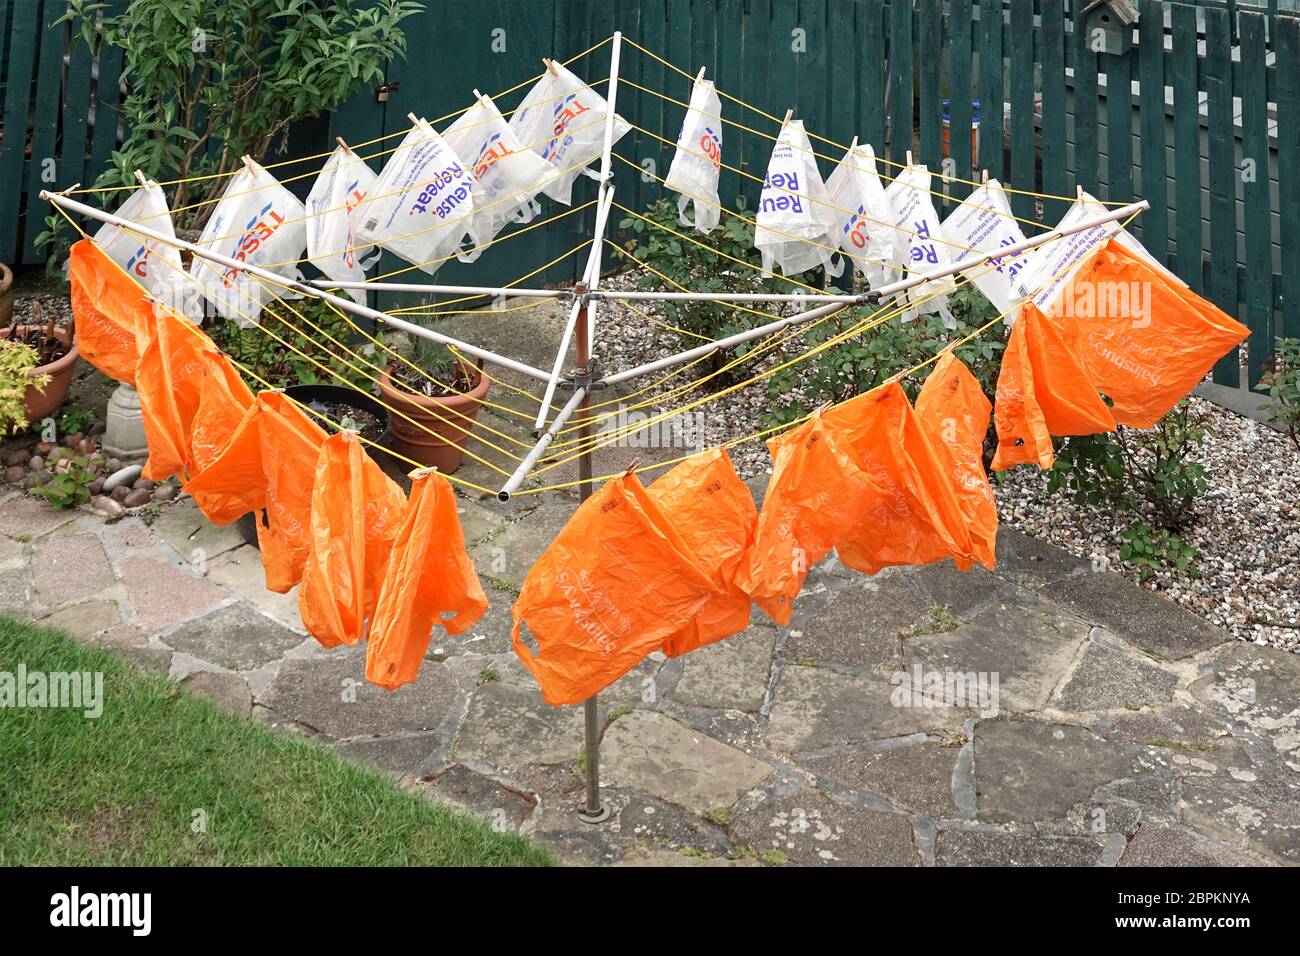 Recycled plastic shopping carrier bags given by supermarket for home delivery of online grocery orders  washed dried & made coronavirus safe reusable Stock Photo